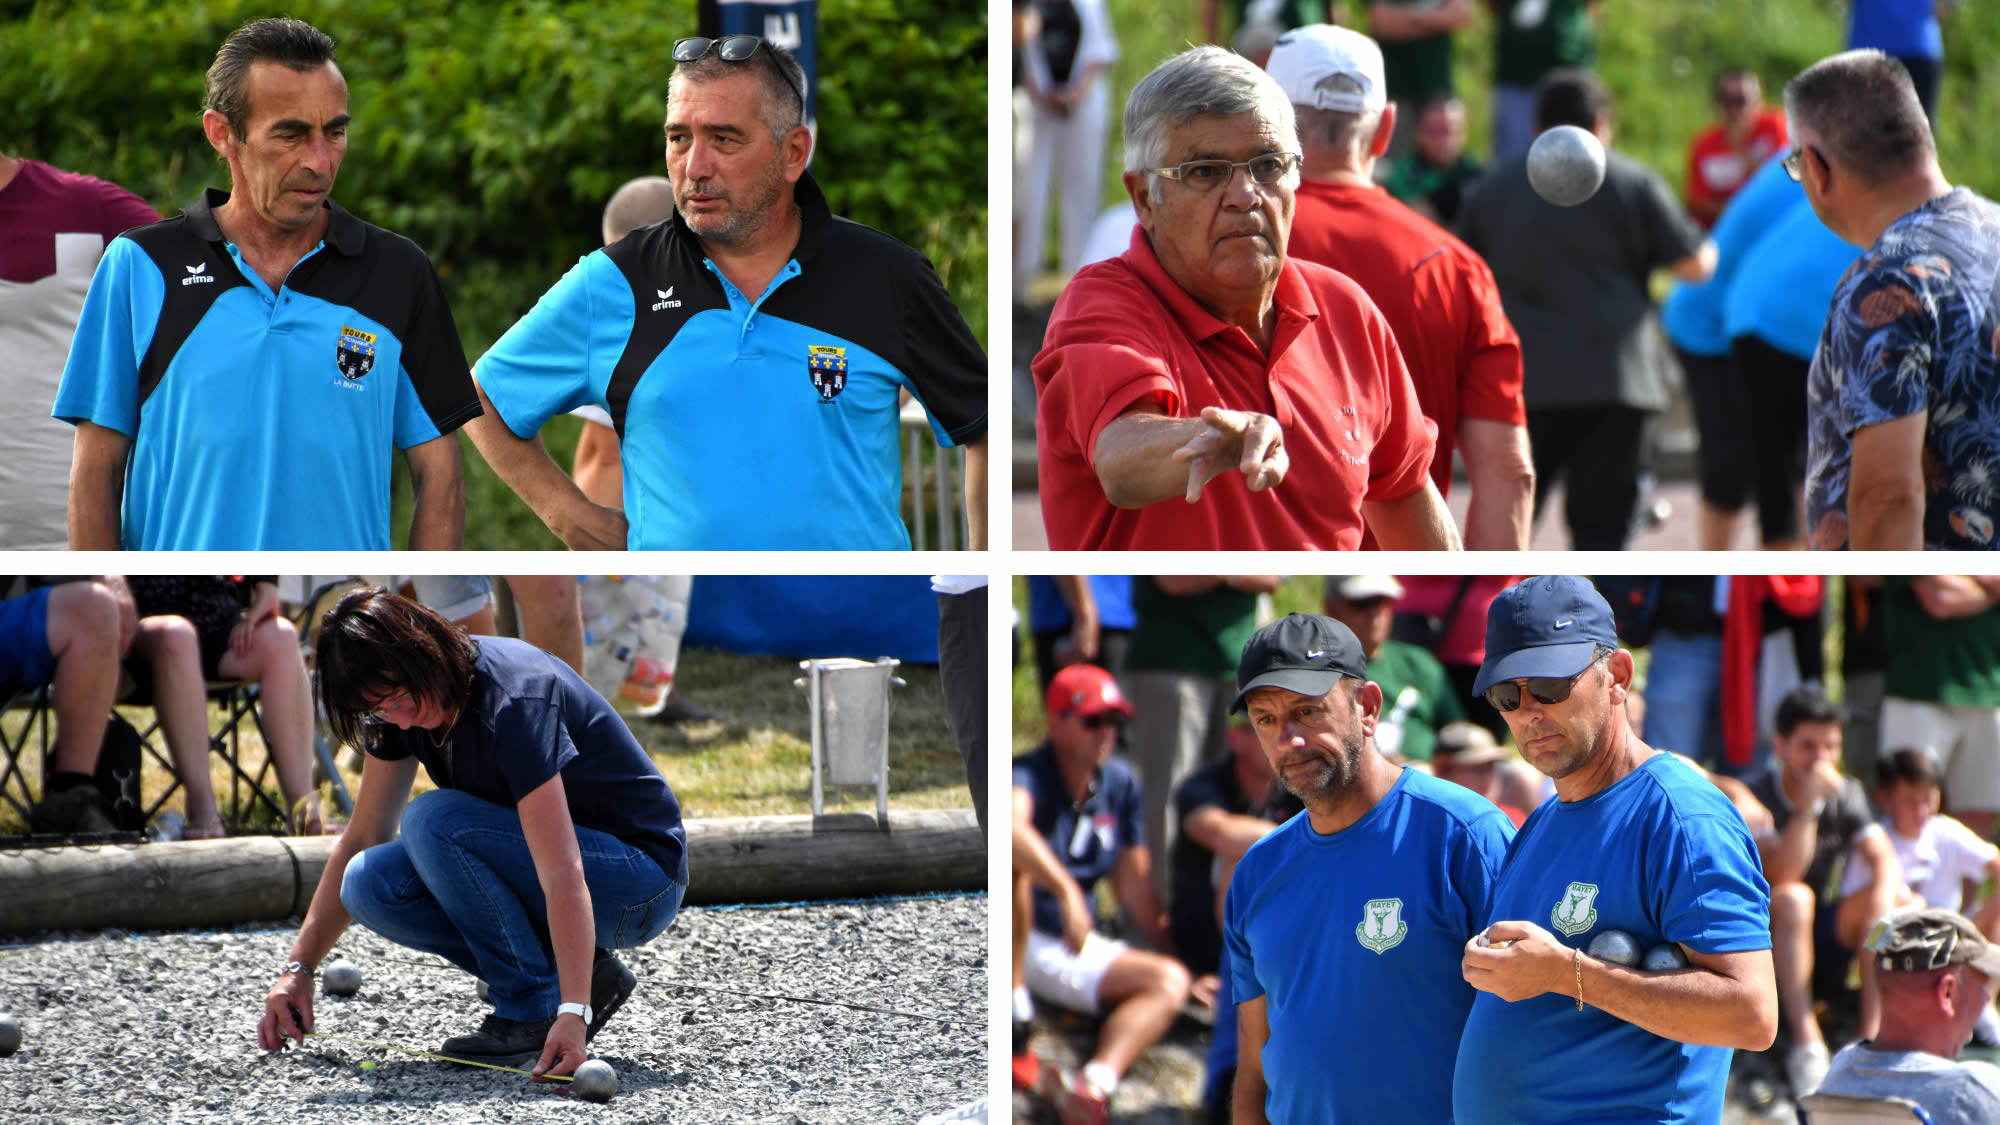 Photo Collage of petanque players